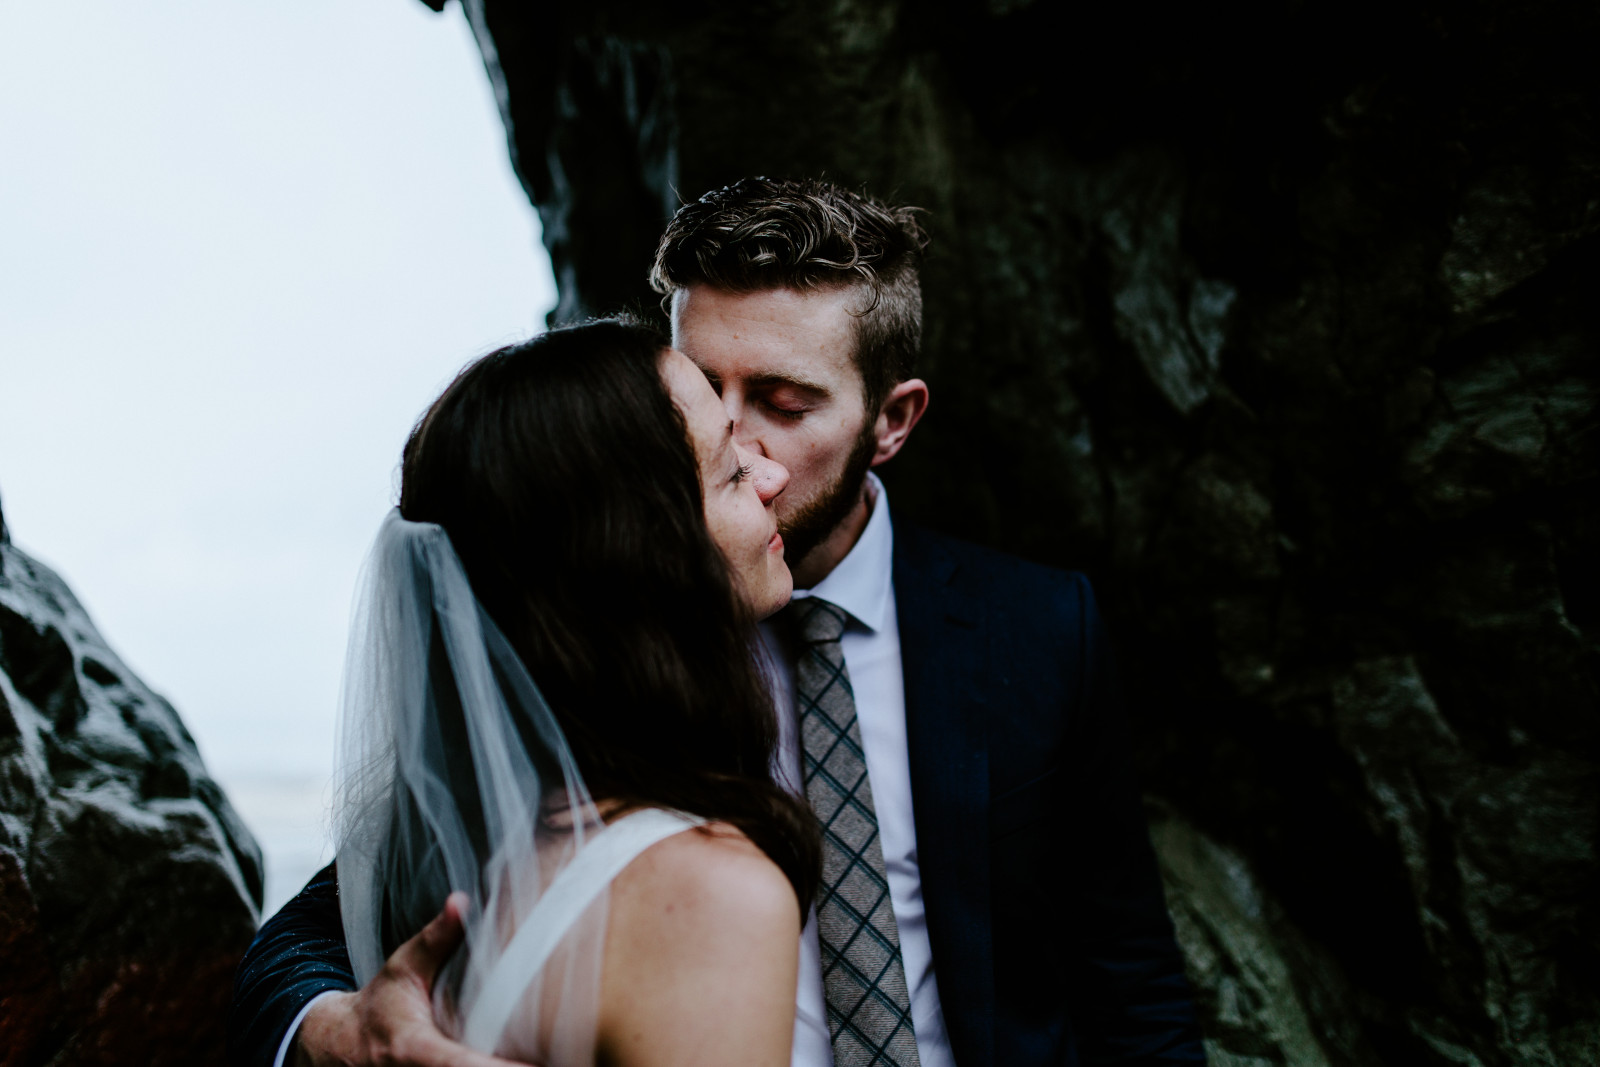 Corey kisses Mollie's cheek. Elopement photography at Olympic National Park by Sienna Plus Josh.